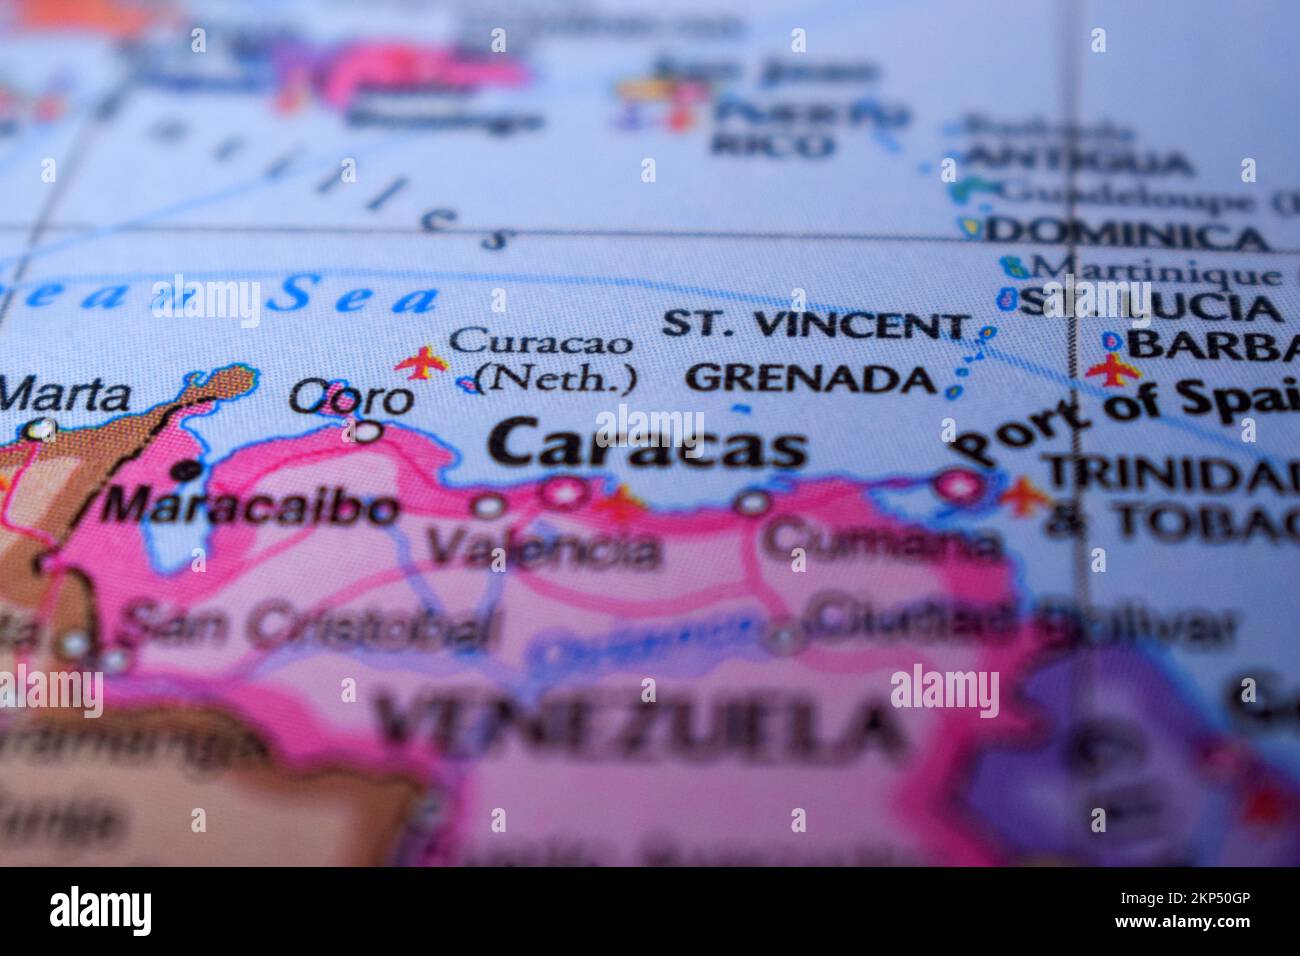 Grenada Travel Concept Country Name On The Political World Map Very Macro Close-Up View Stock Photograph Stock Photo